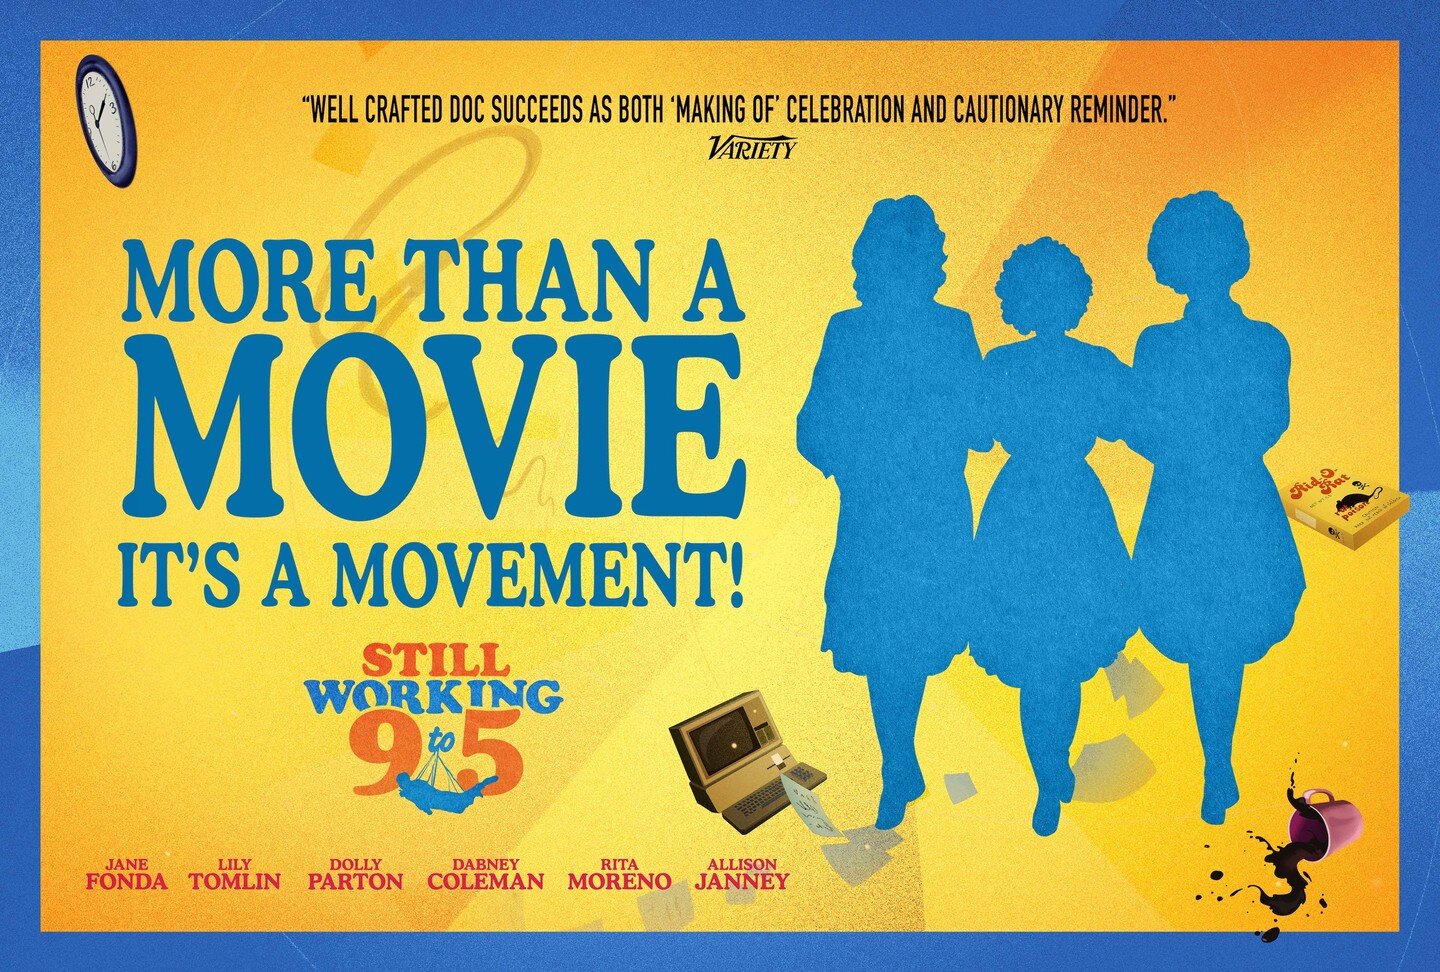 ONE NIGHT ONLY! Come relive the magic of 9 to 5 and feel empowered once again. See you tonight for this fun and powerful film! 

#breckfilmsociety #breckenridge #9to5